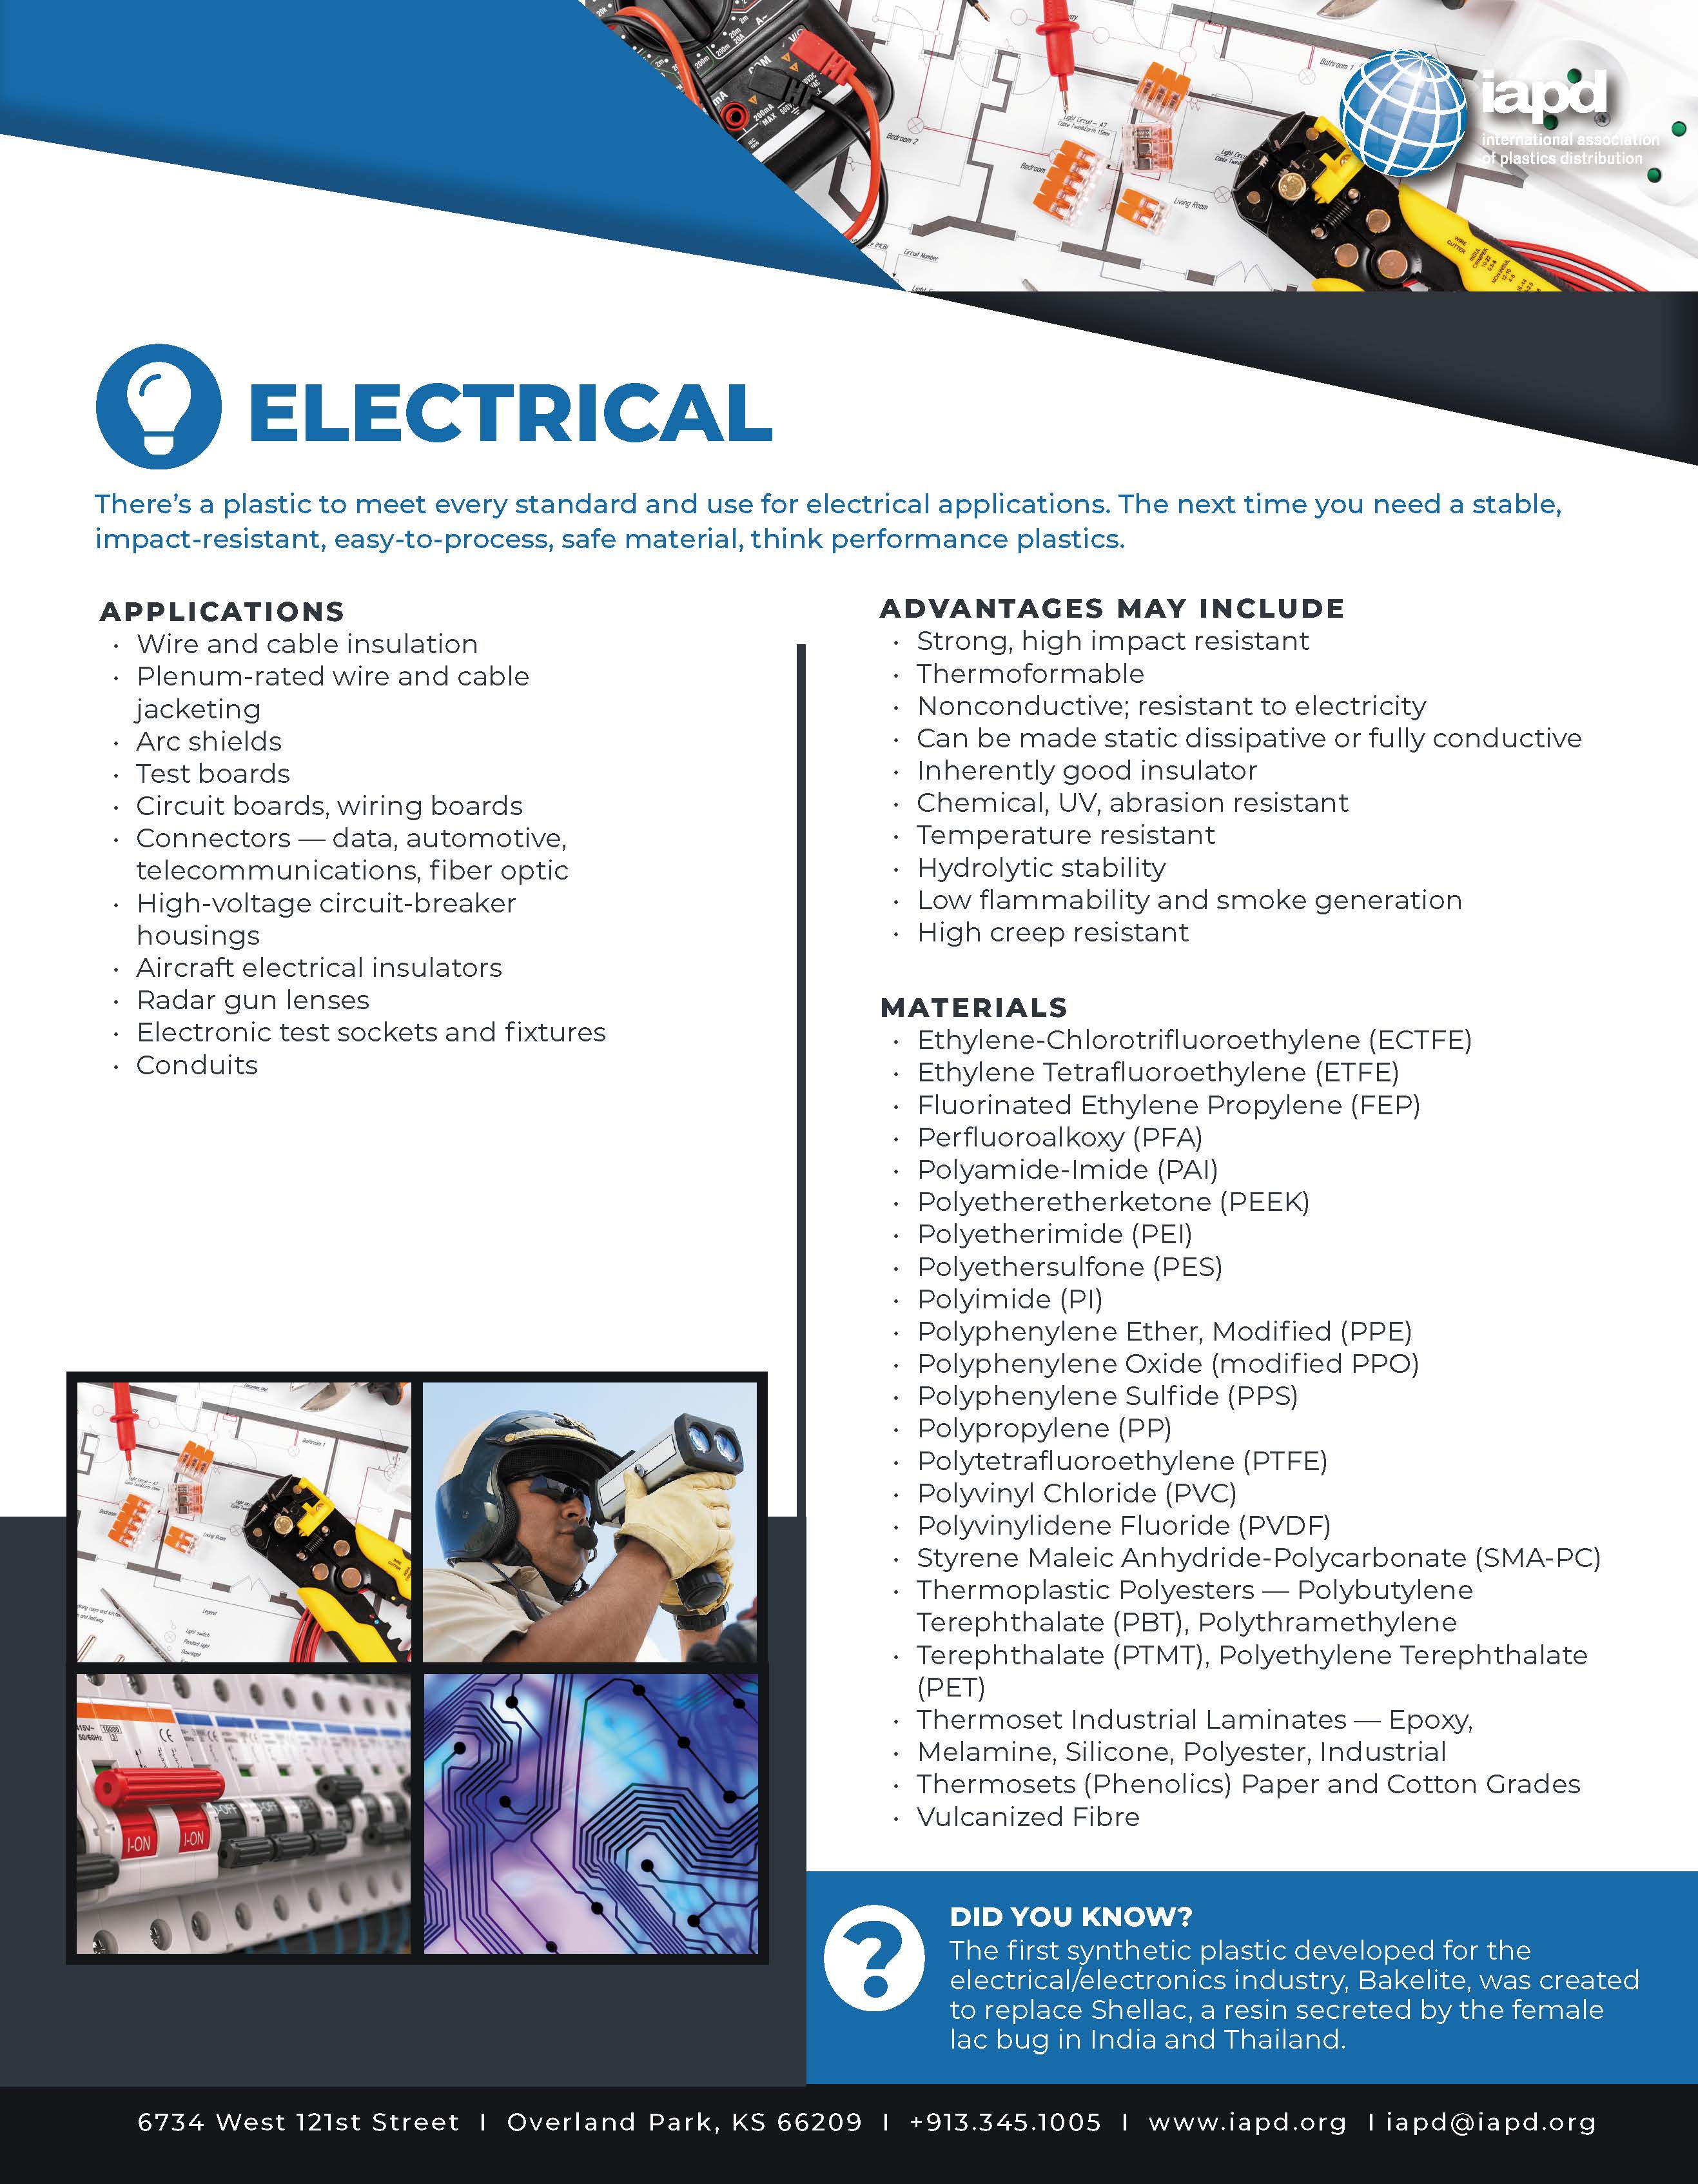 Top 26 Markets for Plastics: Electrical